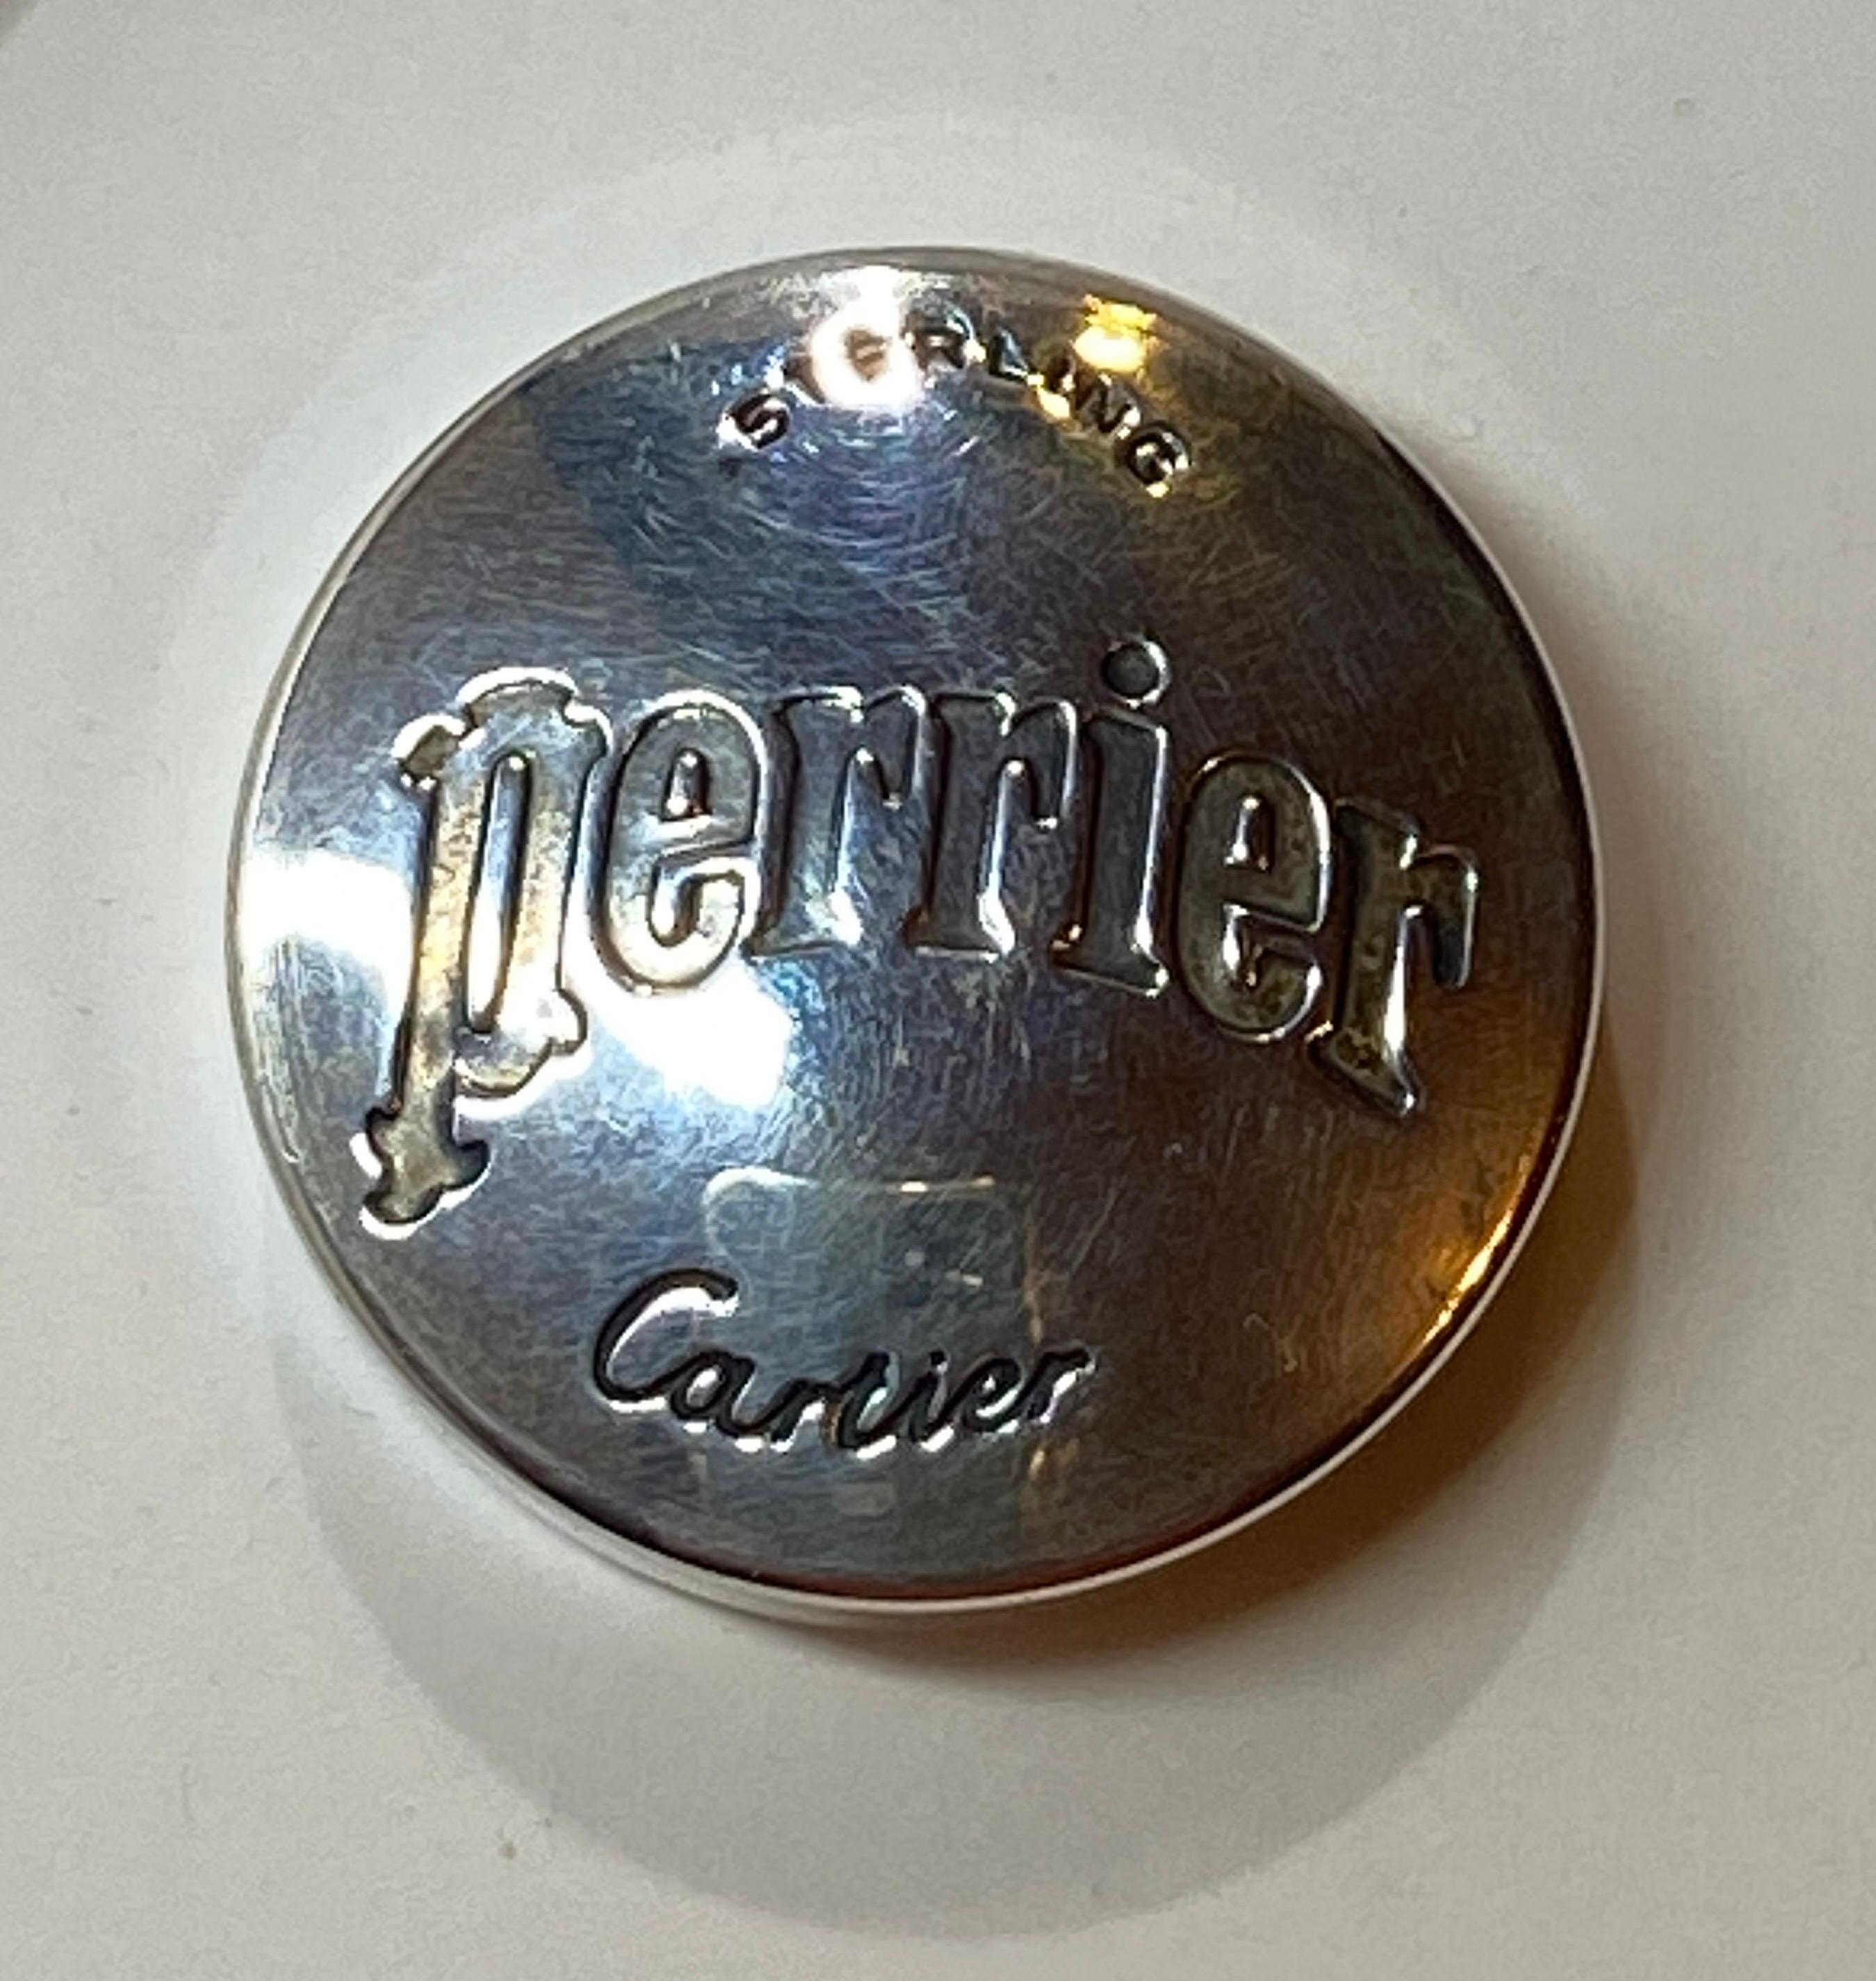 Cartier Boxed Sterling Silver Set of Perrier Bottle Caps and Bottle Opener For Sale 2